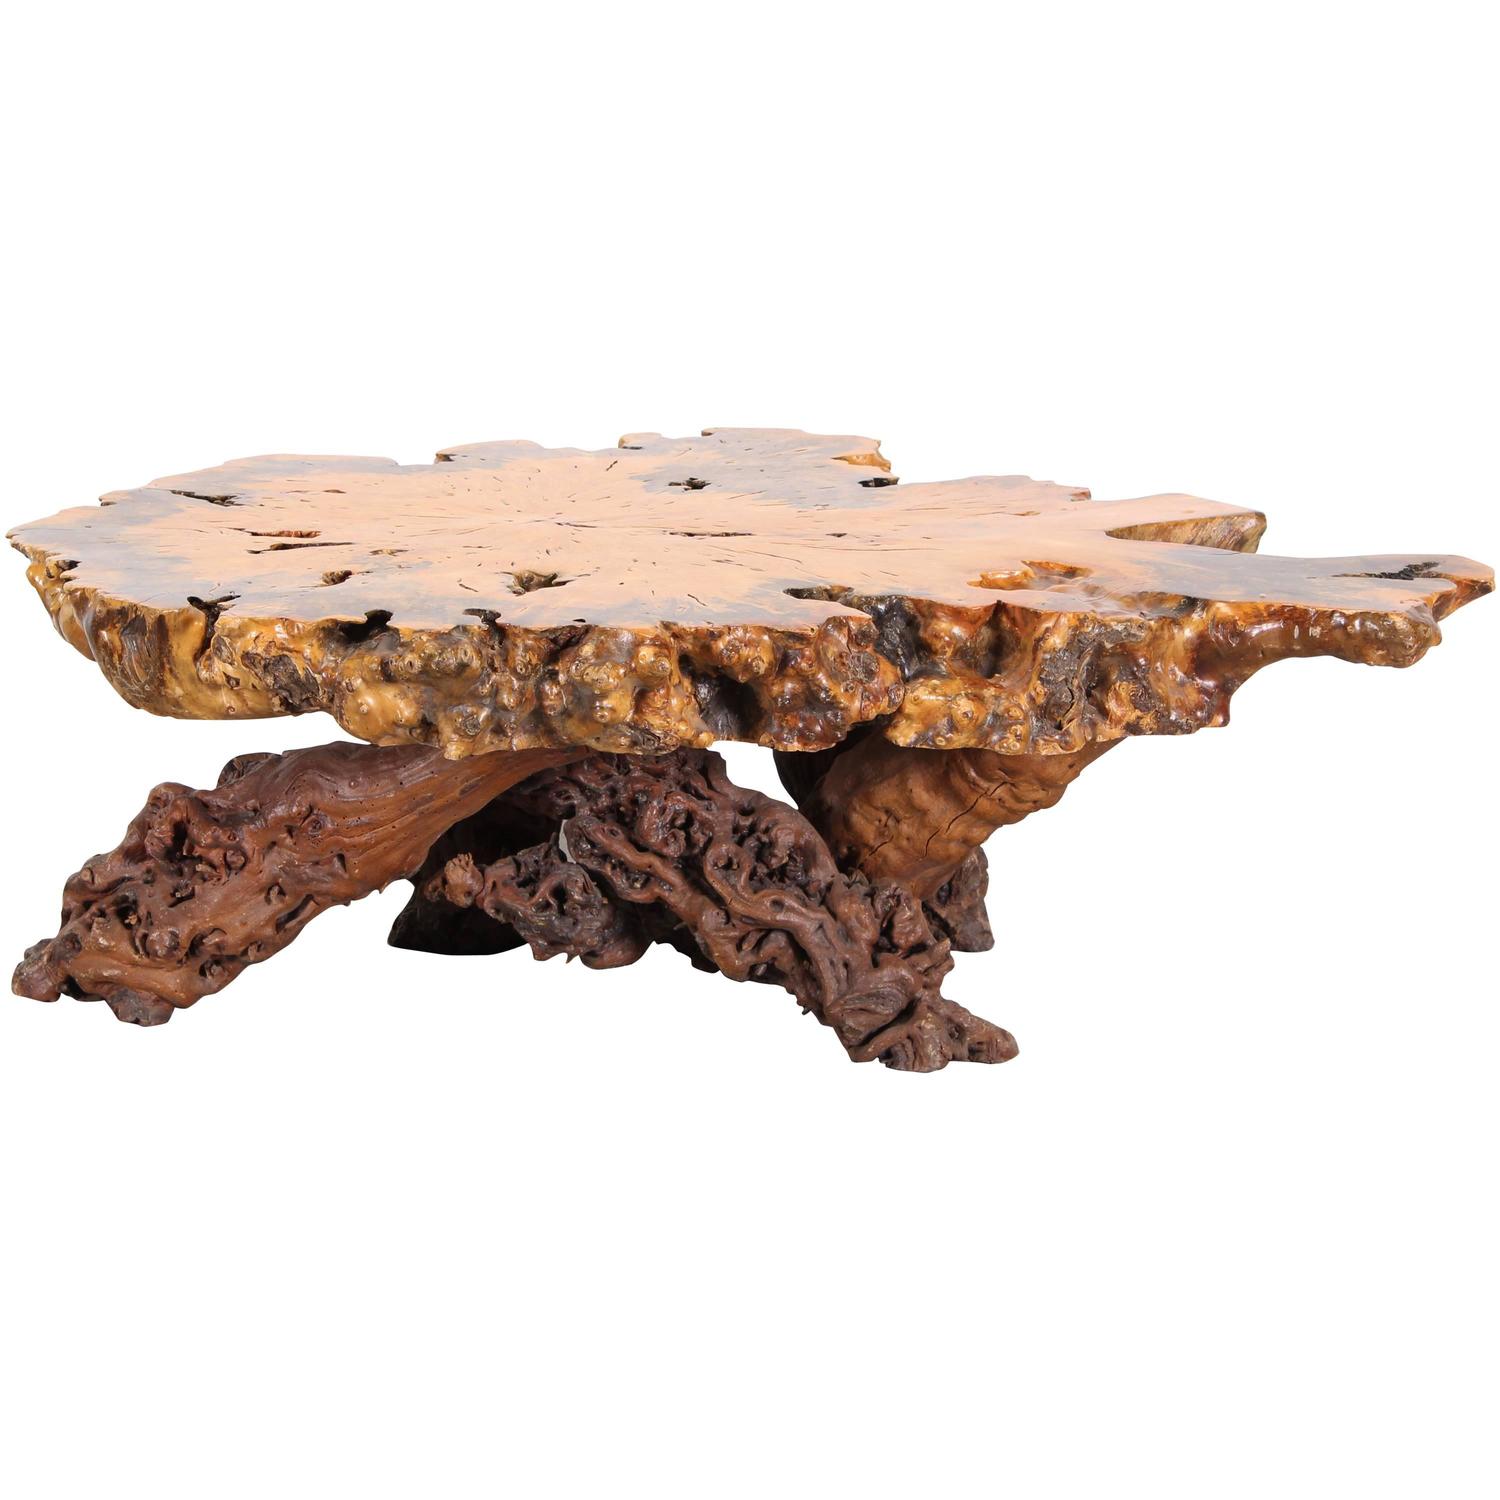 burl wood nakashima style maple slab coffee table accent large drop leaf dining mosaic patio floor lamps toronto living room center decor nautical side essentials mirror light